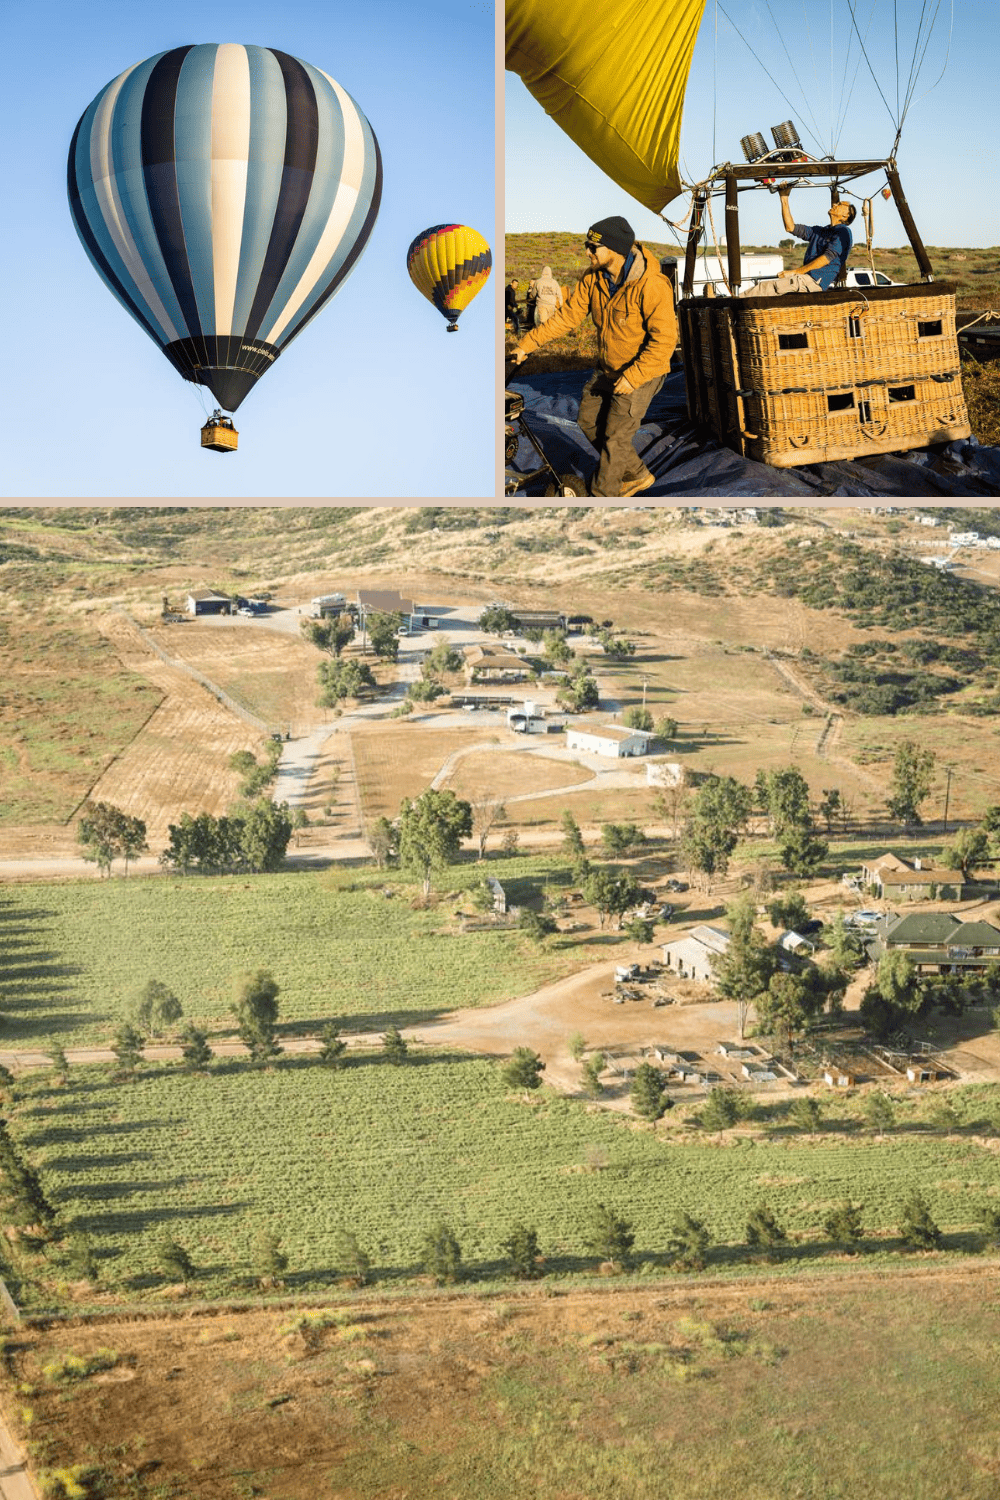 Enjoy a Birds Eye View of Wine Country with a Grape Escape